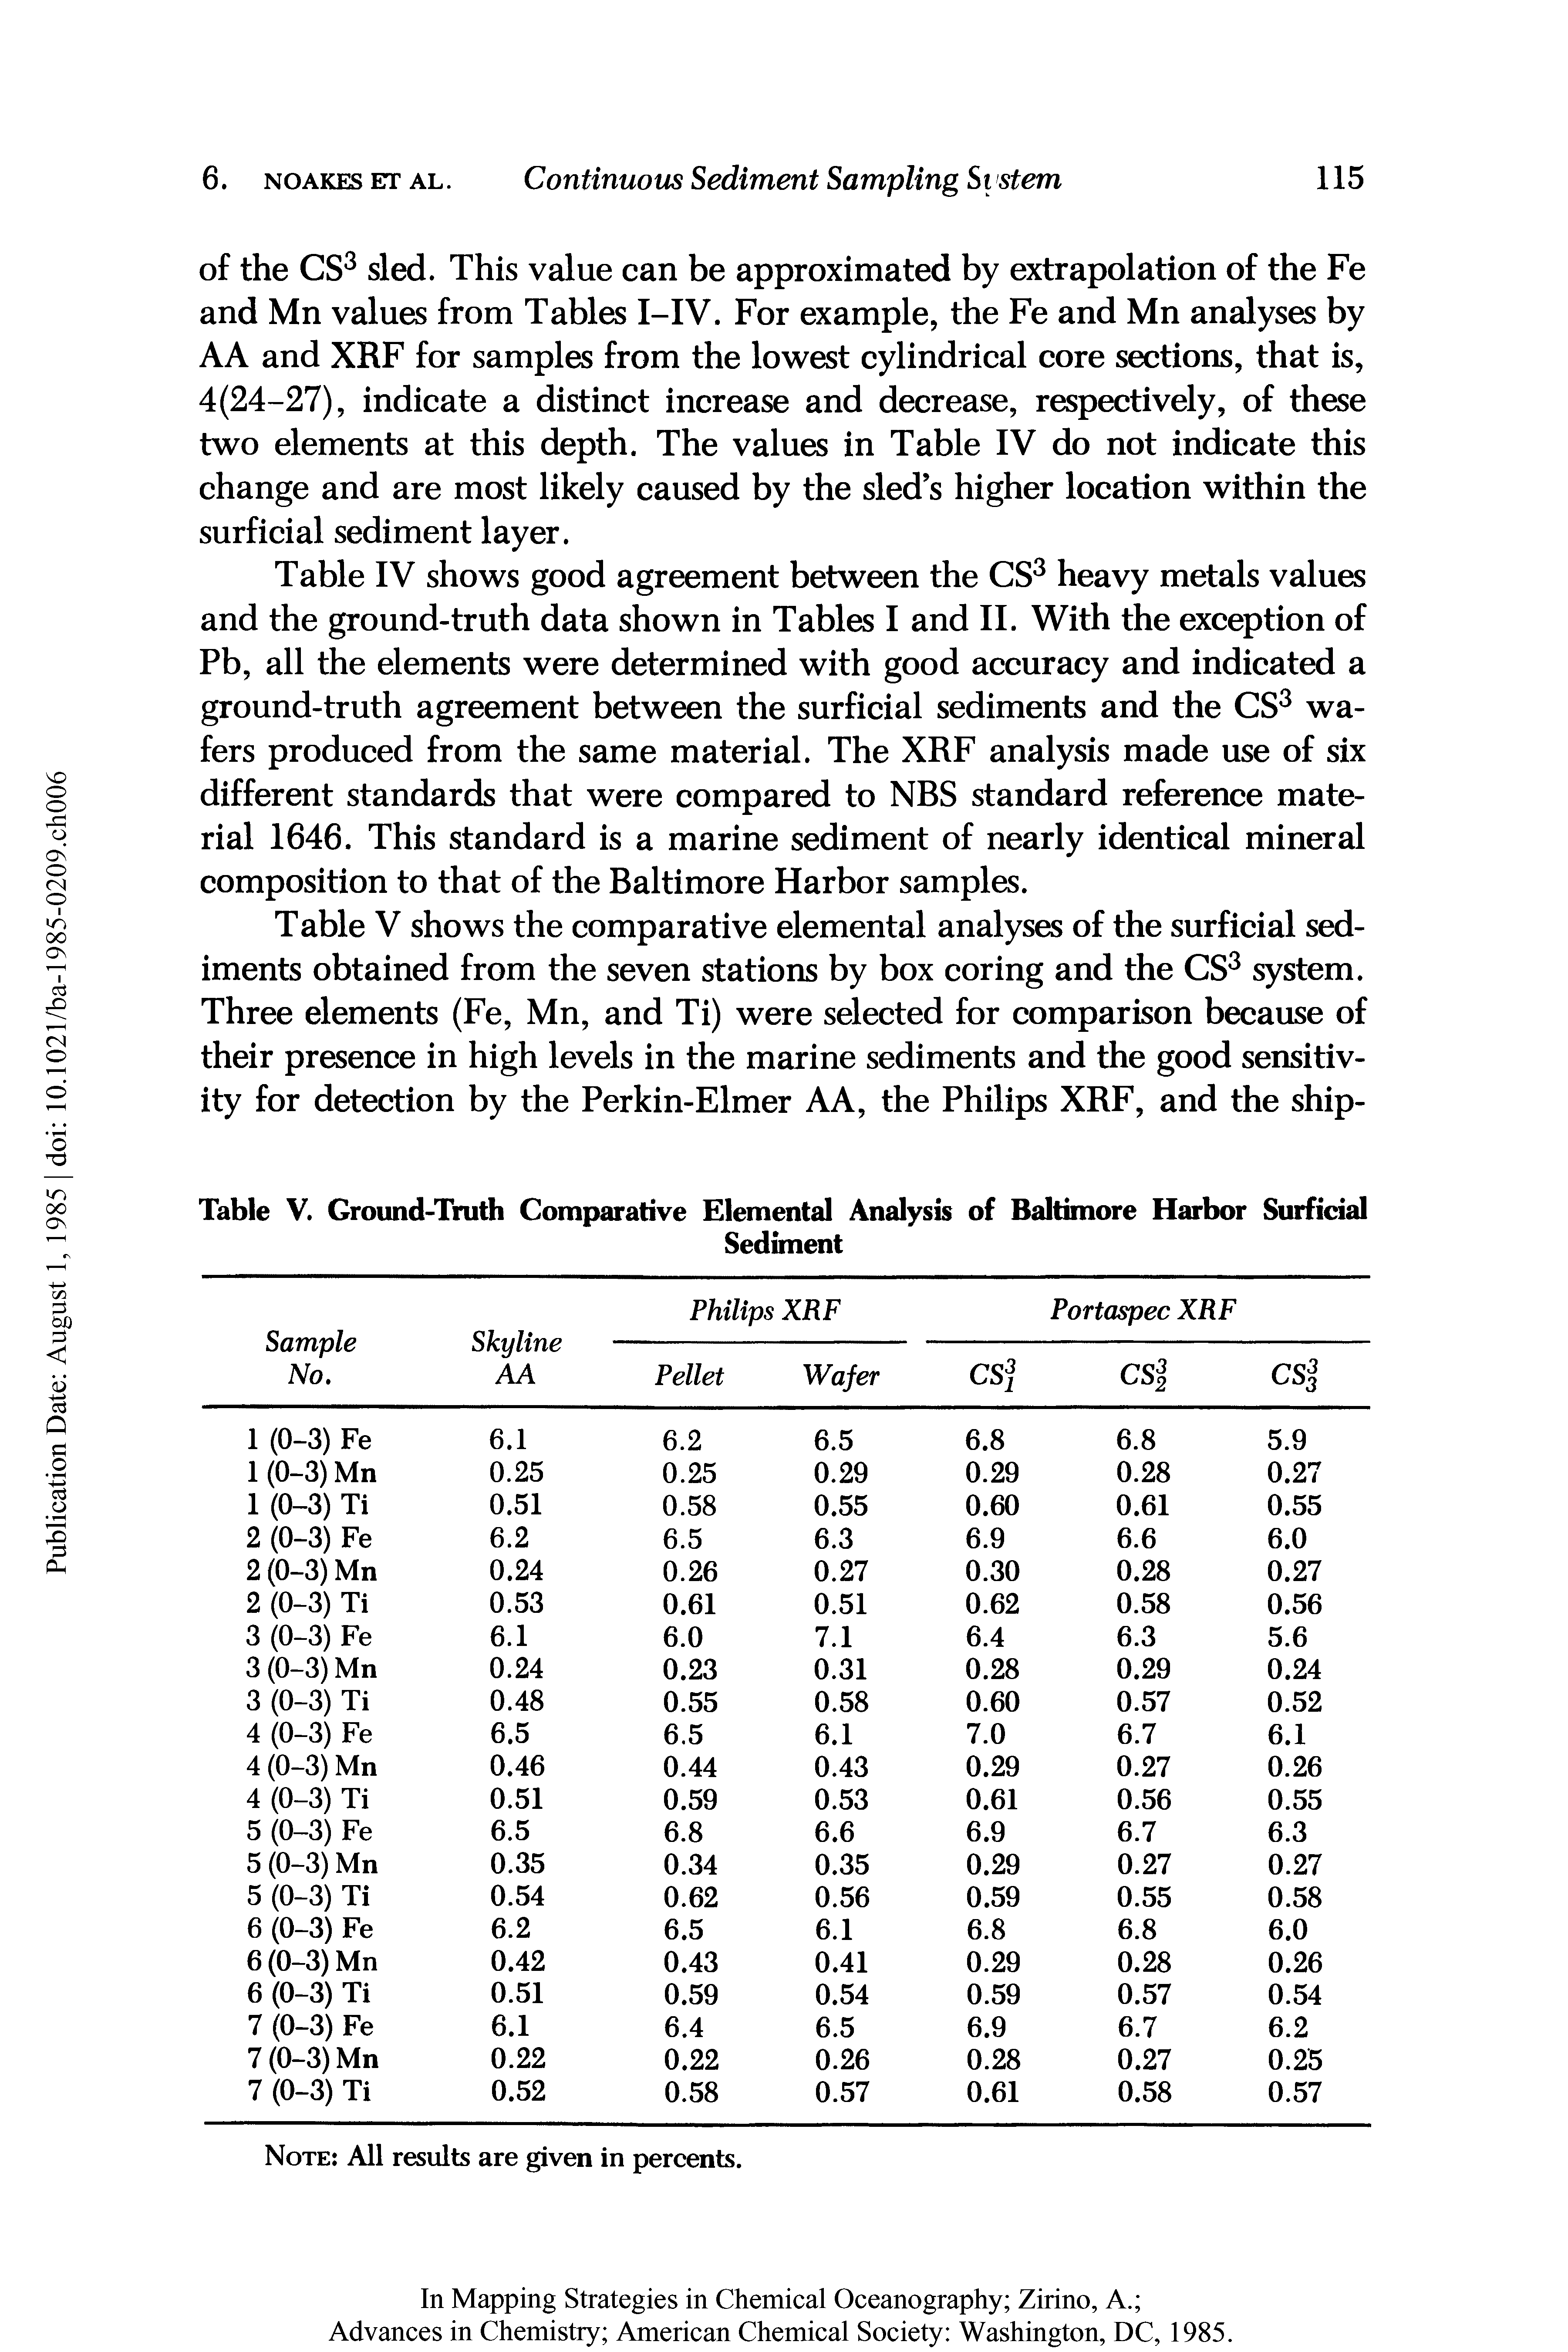 Table IV shows good agreement between the CS heavy metals values and the ground-truth data shown in Tables I and II. With the exception of Pb, all the elements were determined with good accuracy and indicated a ground-truth agreement between the surficial sediments and the CS wafers produced from the same material. The XRF analysis made use of six different standards that were compared to NBS standard reference material 1646. This standard is a marine sediment of nearly identical mineral composition to that of the Baltimore Harbor samples.